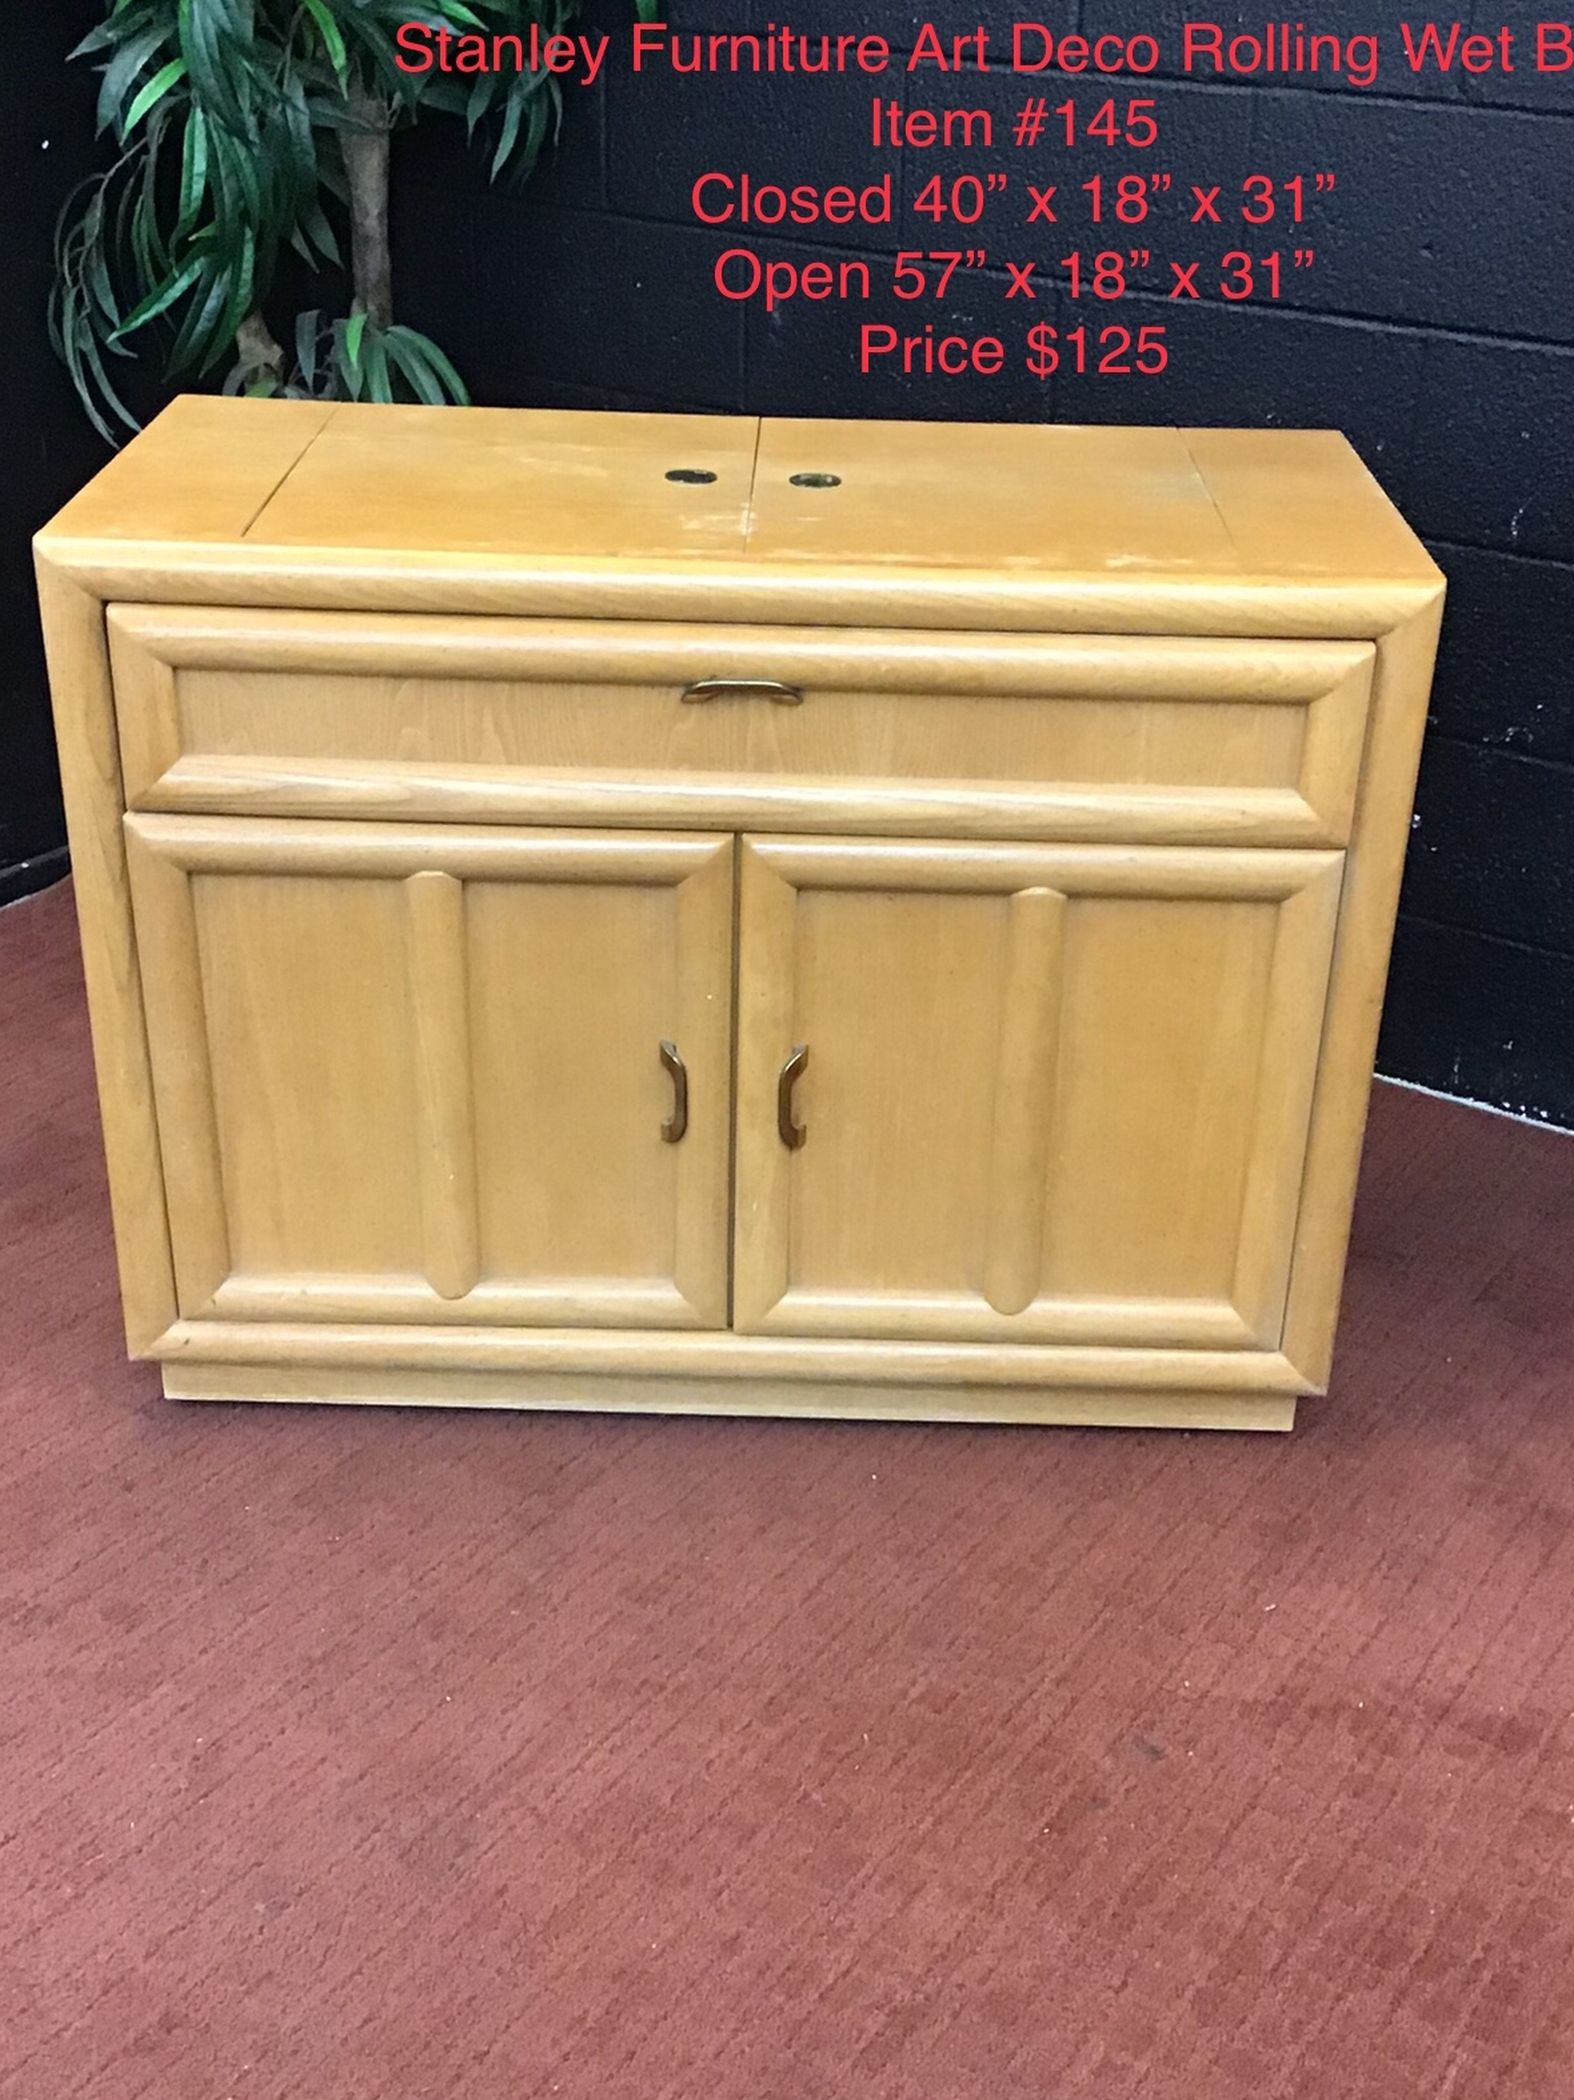 Stanley Furniture Art Deco Rolling Wet Bar for Sale in Cottonwood